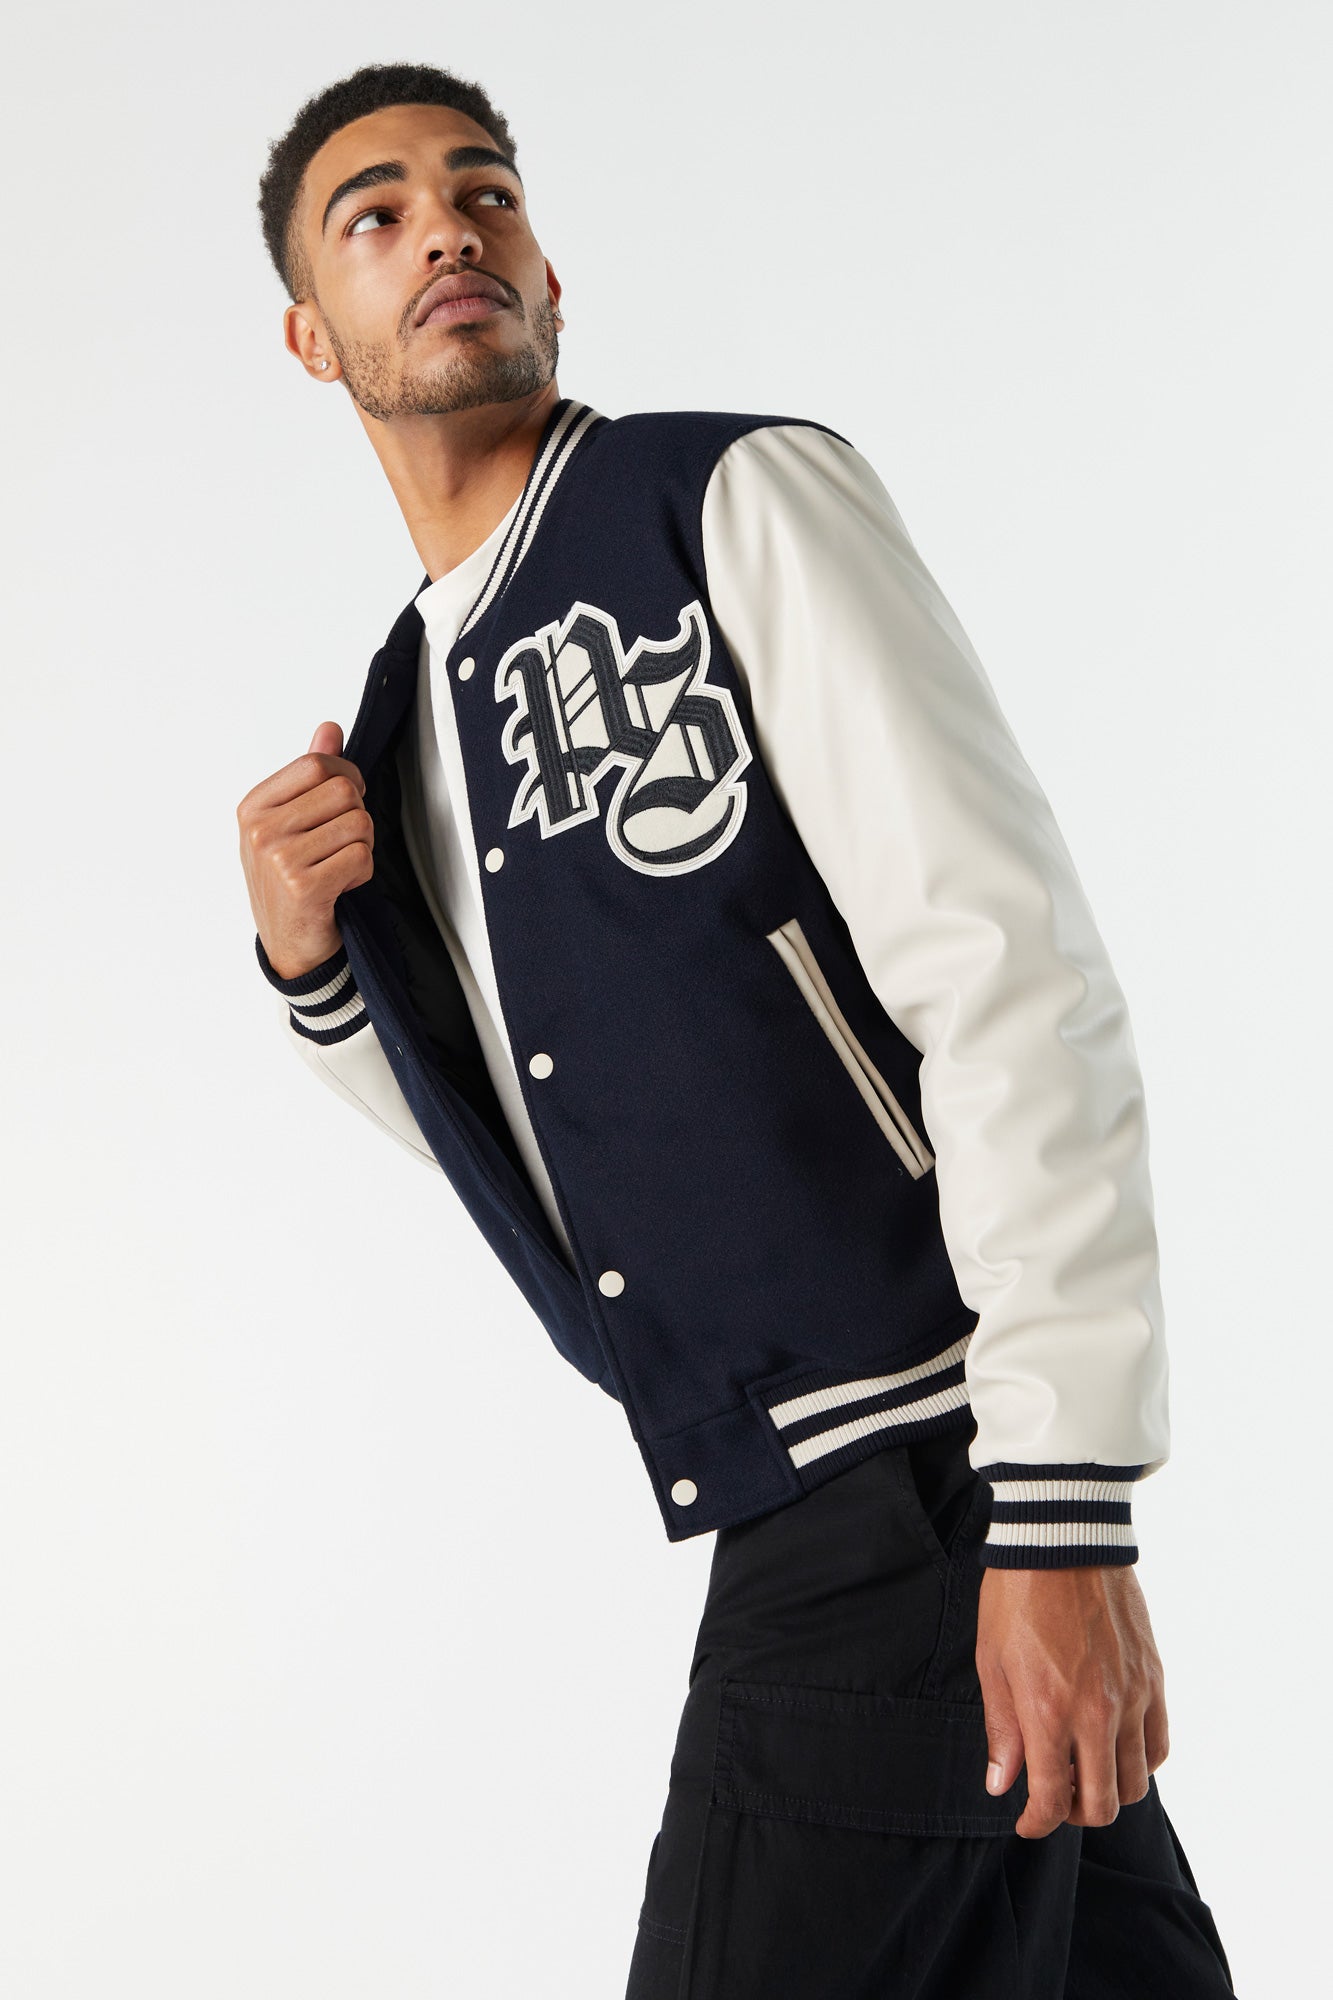 Embroidered Letterman Varsity Jacket Gift for Friend 